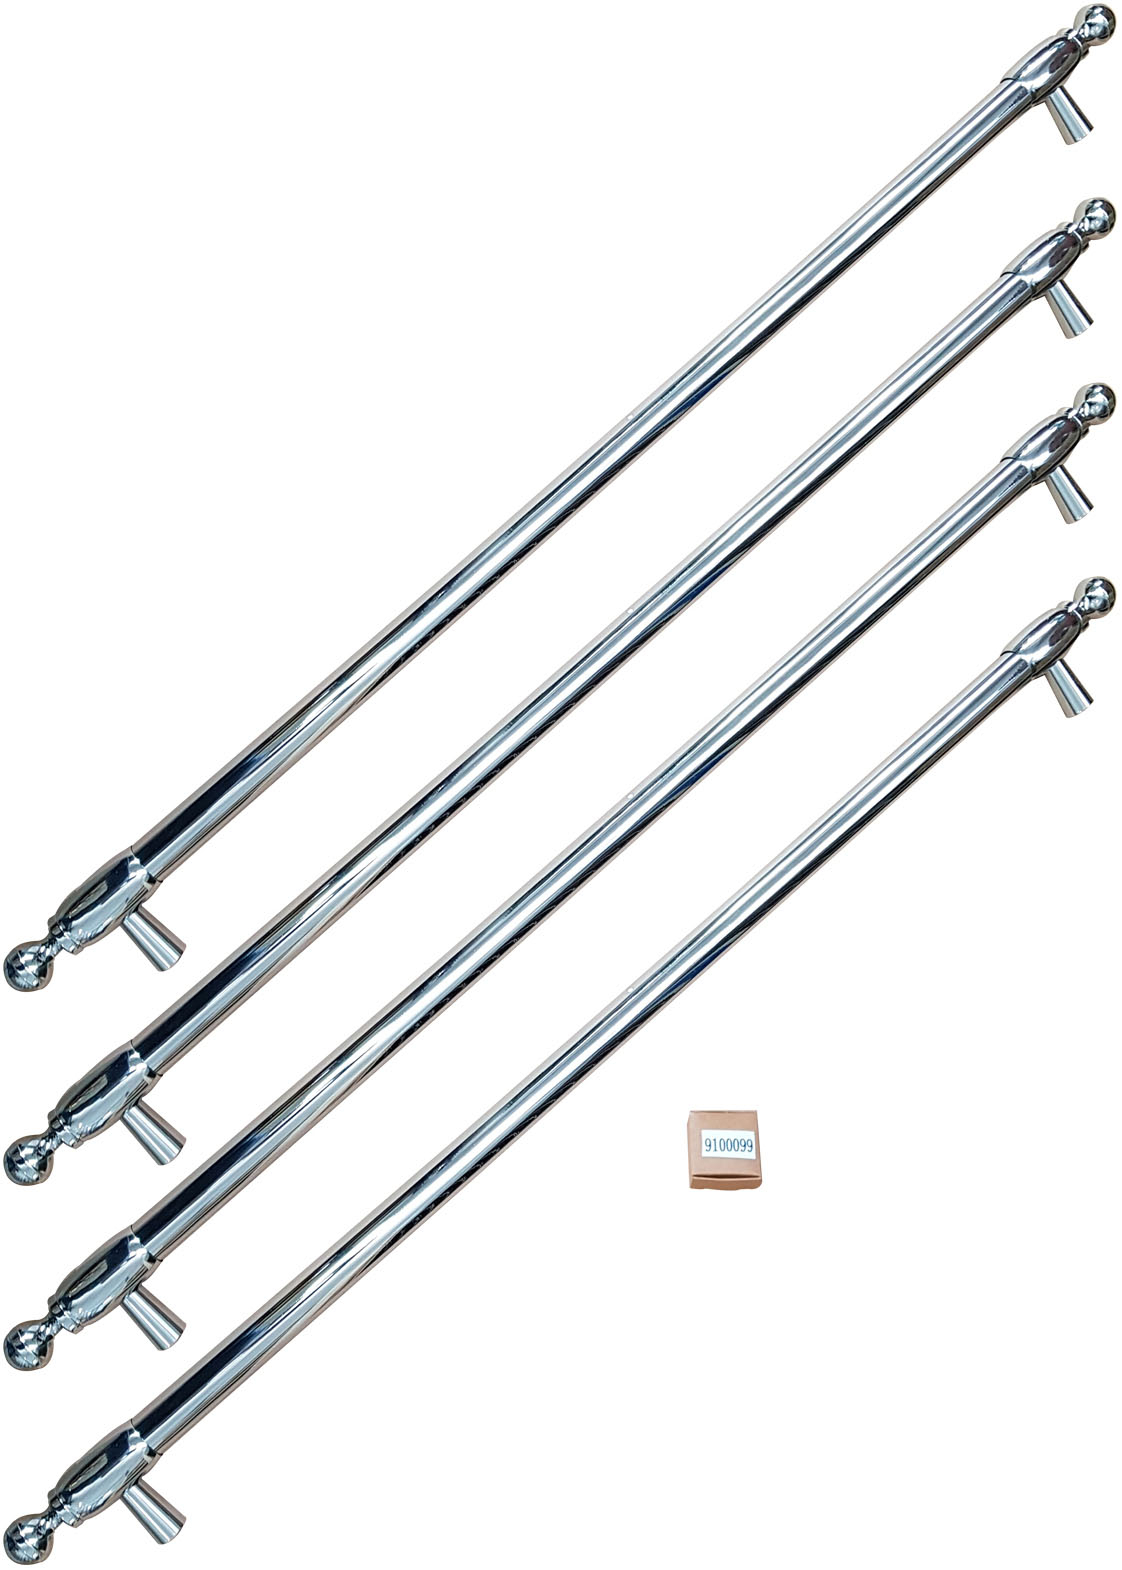 Angle View: Bertazzoni - Heritage Series handle set for a 36" French door refrigerator - Stainless steel